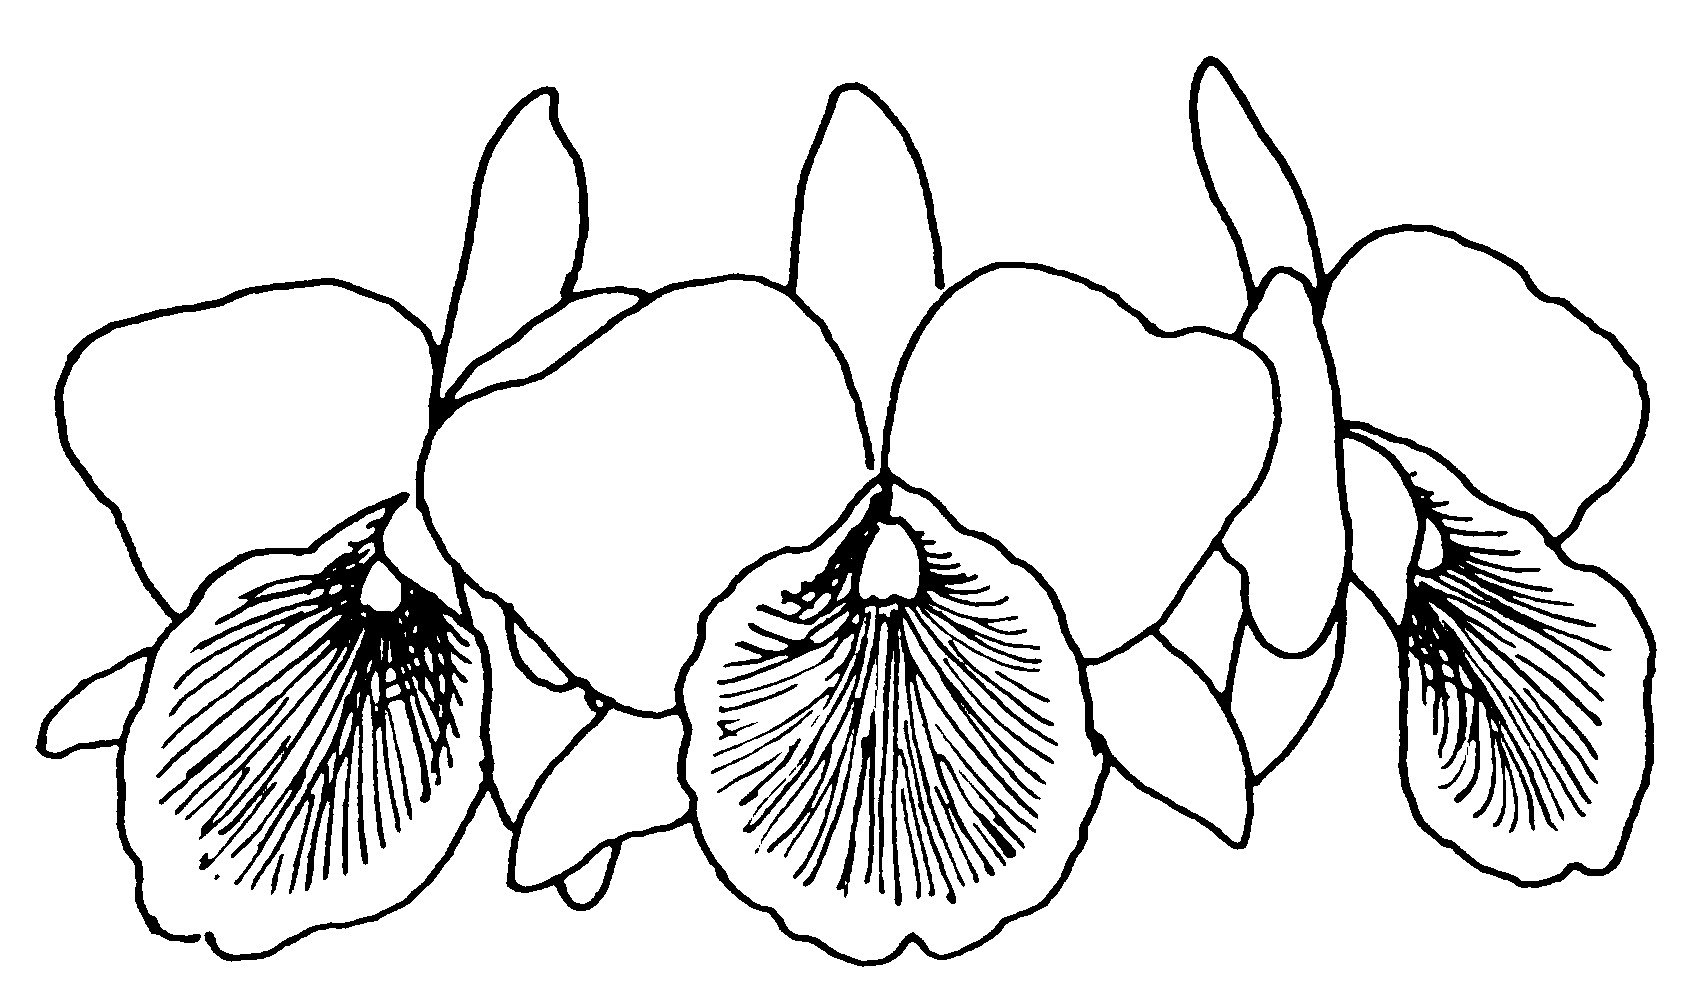 Three Orchid Flowers Coloring Page